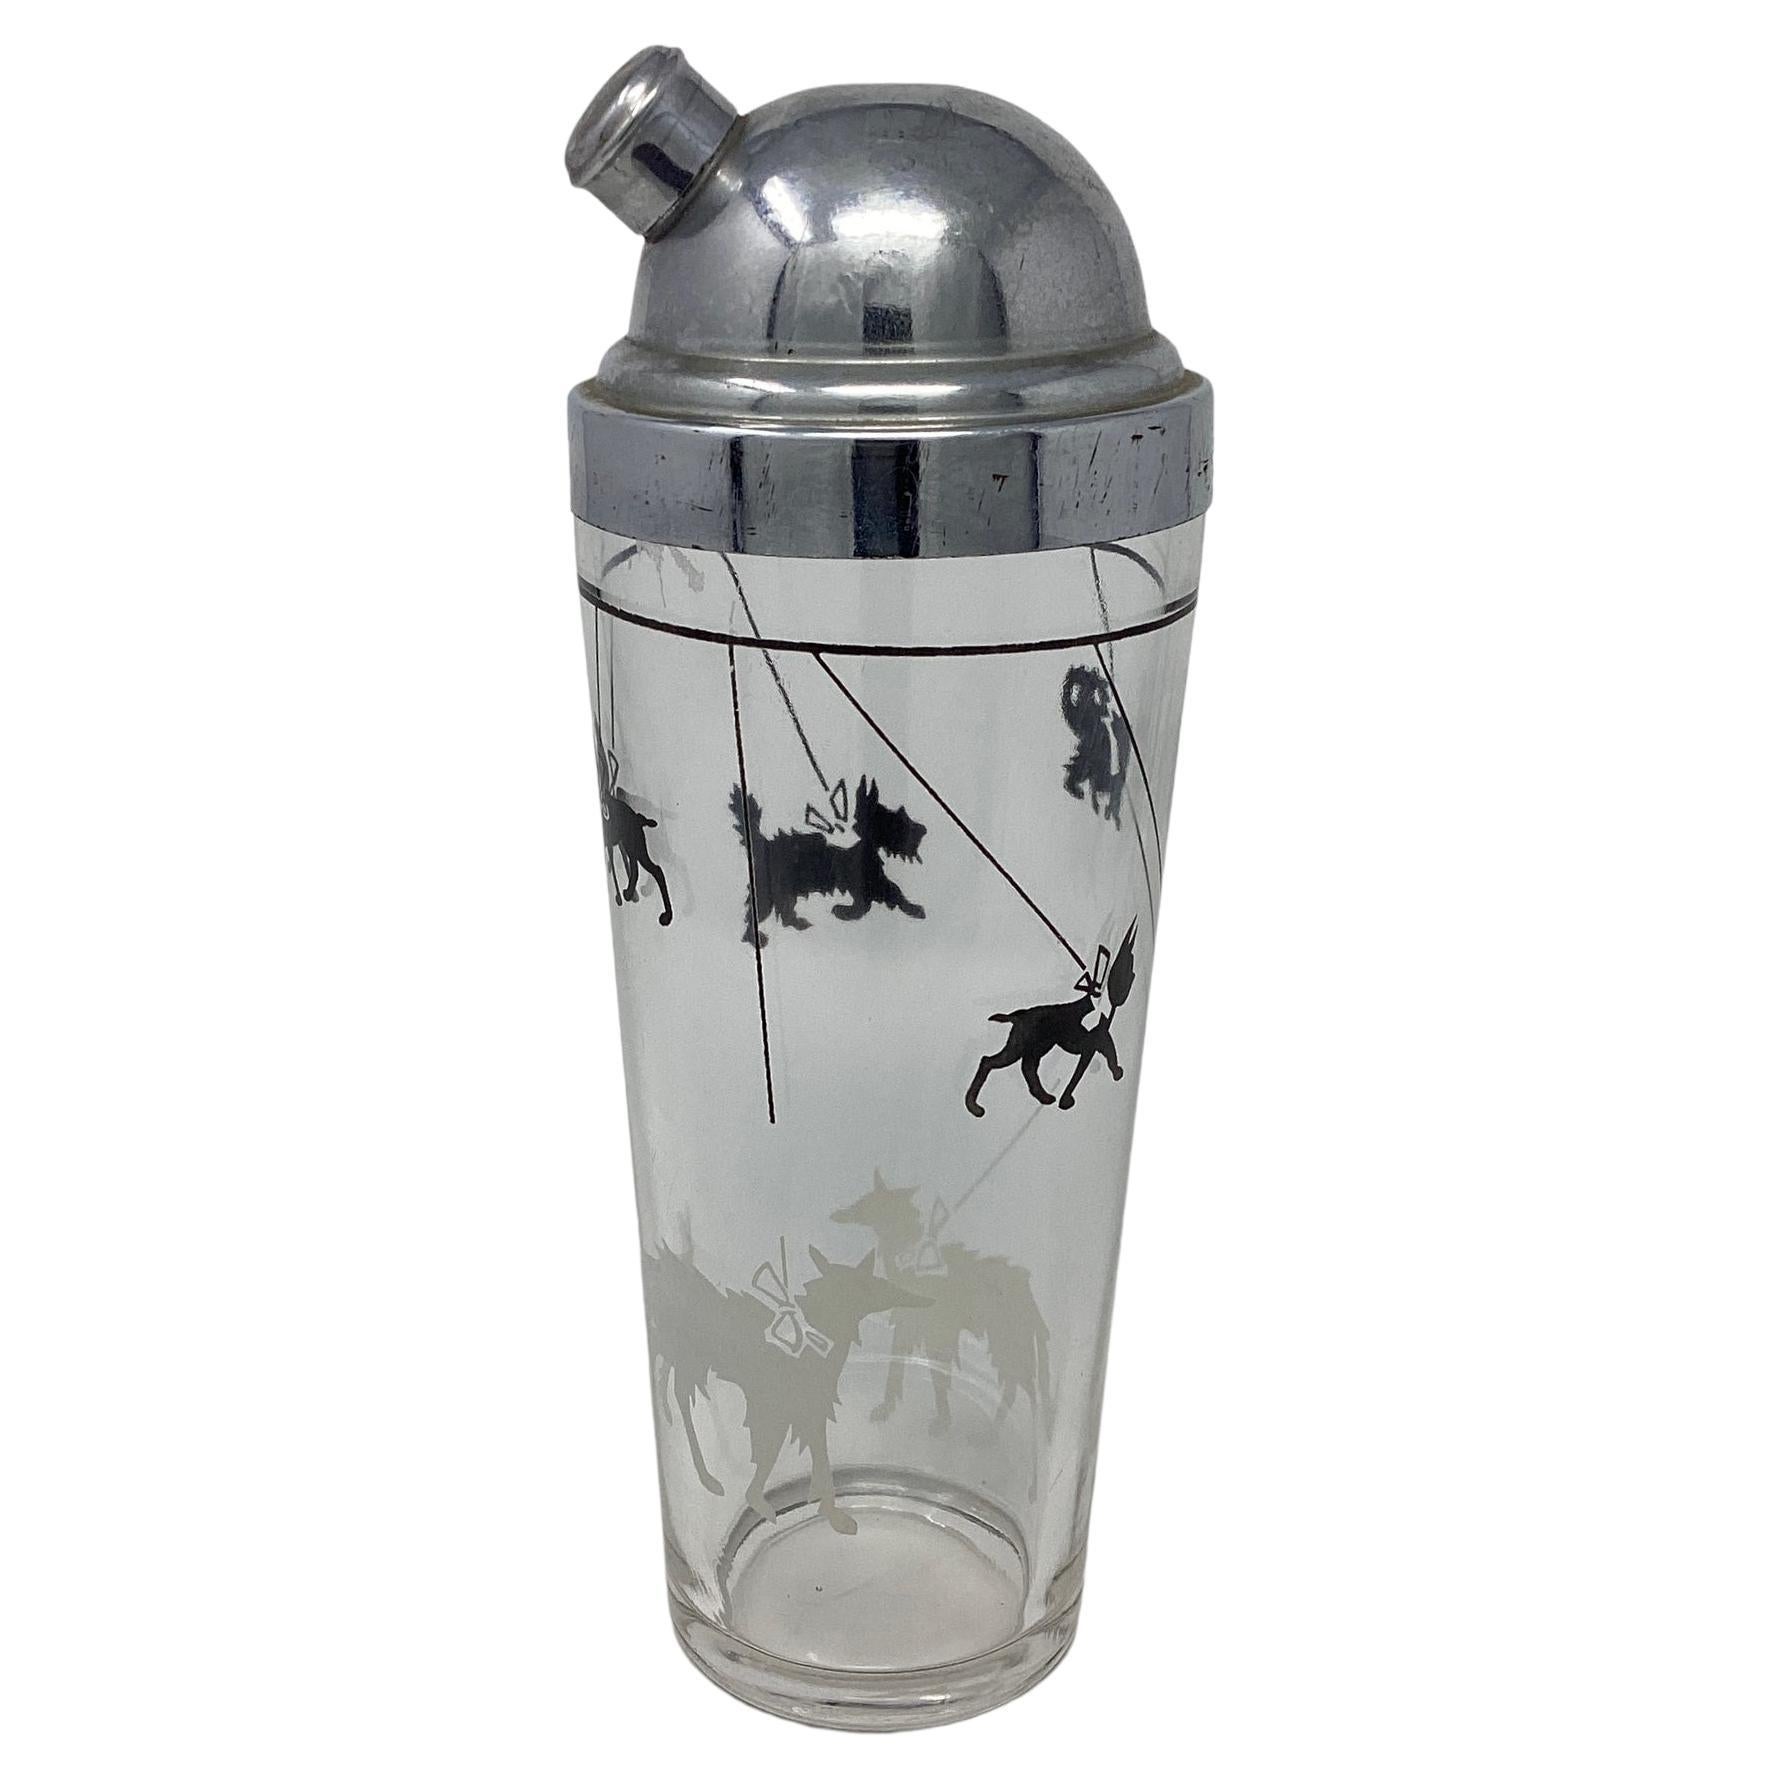 Art Deco Hazel-Atlas Cocktail Shaker with Leashed Dogs